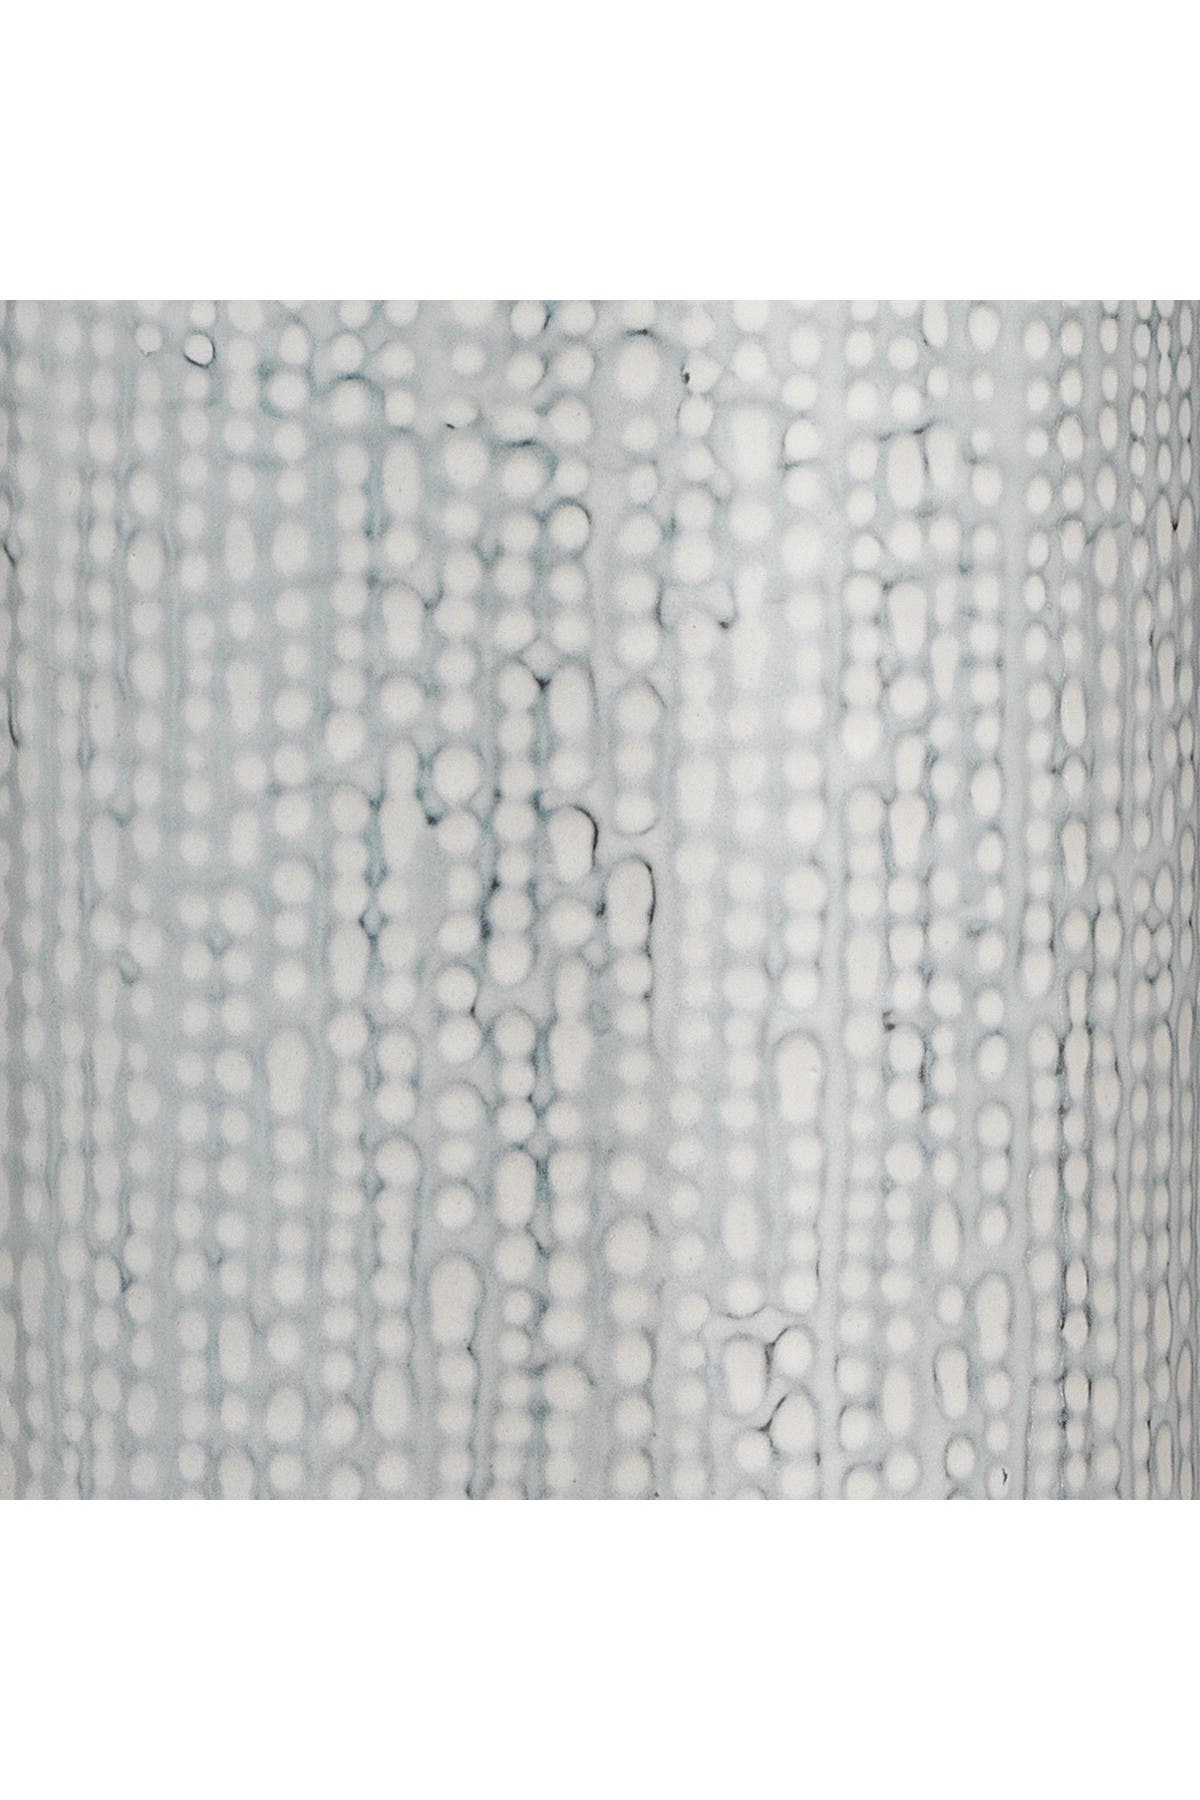 Jamie Young Bella Table Lamp In Light Blue Patterned Ceramic With Drum Shade In White Linen